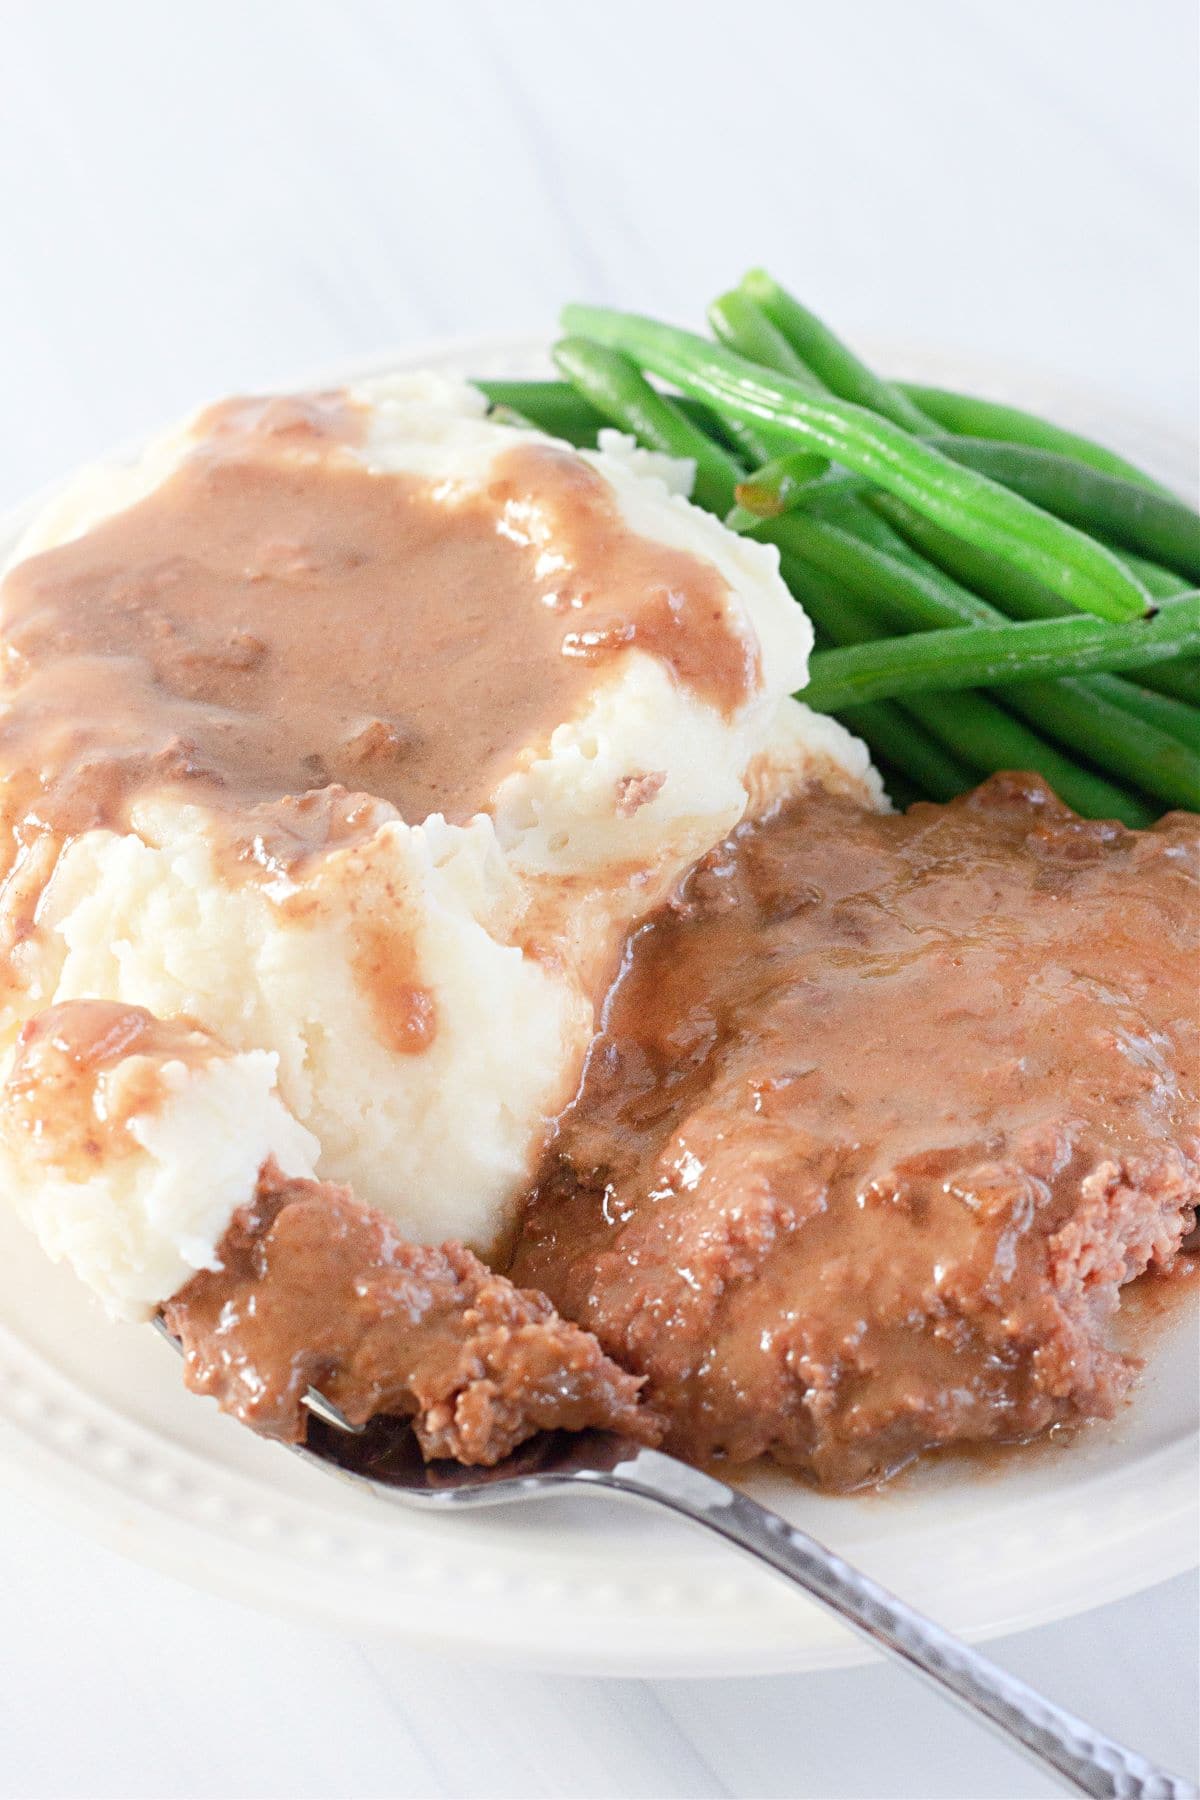 a plate of mashed potatoes, green beans, and cube steak with gravy